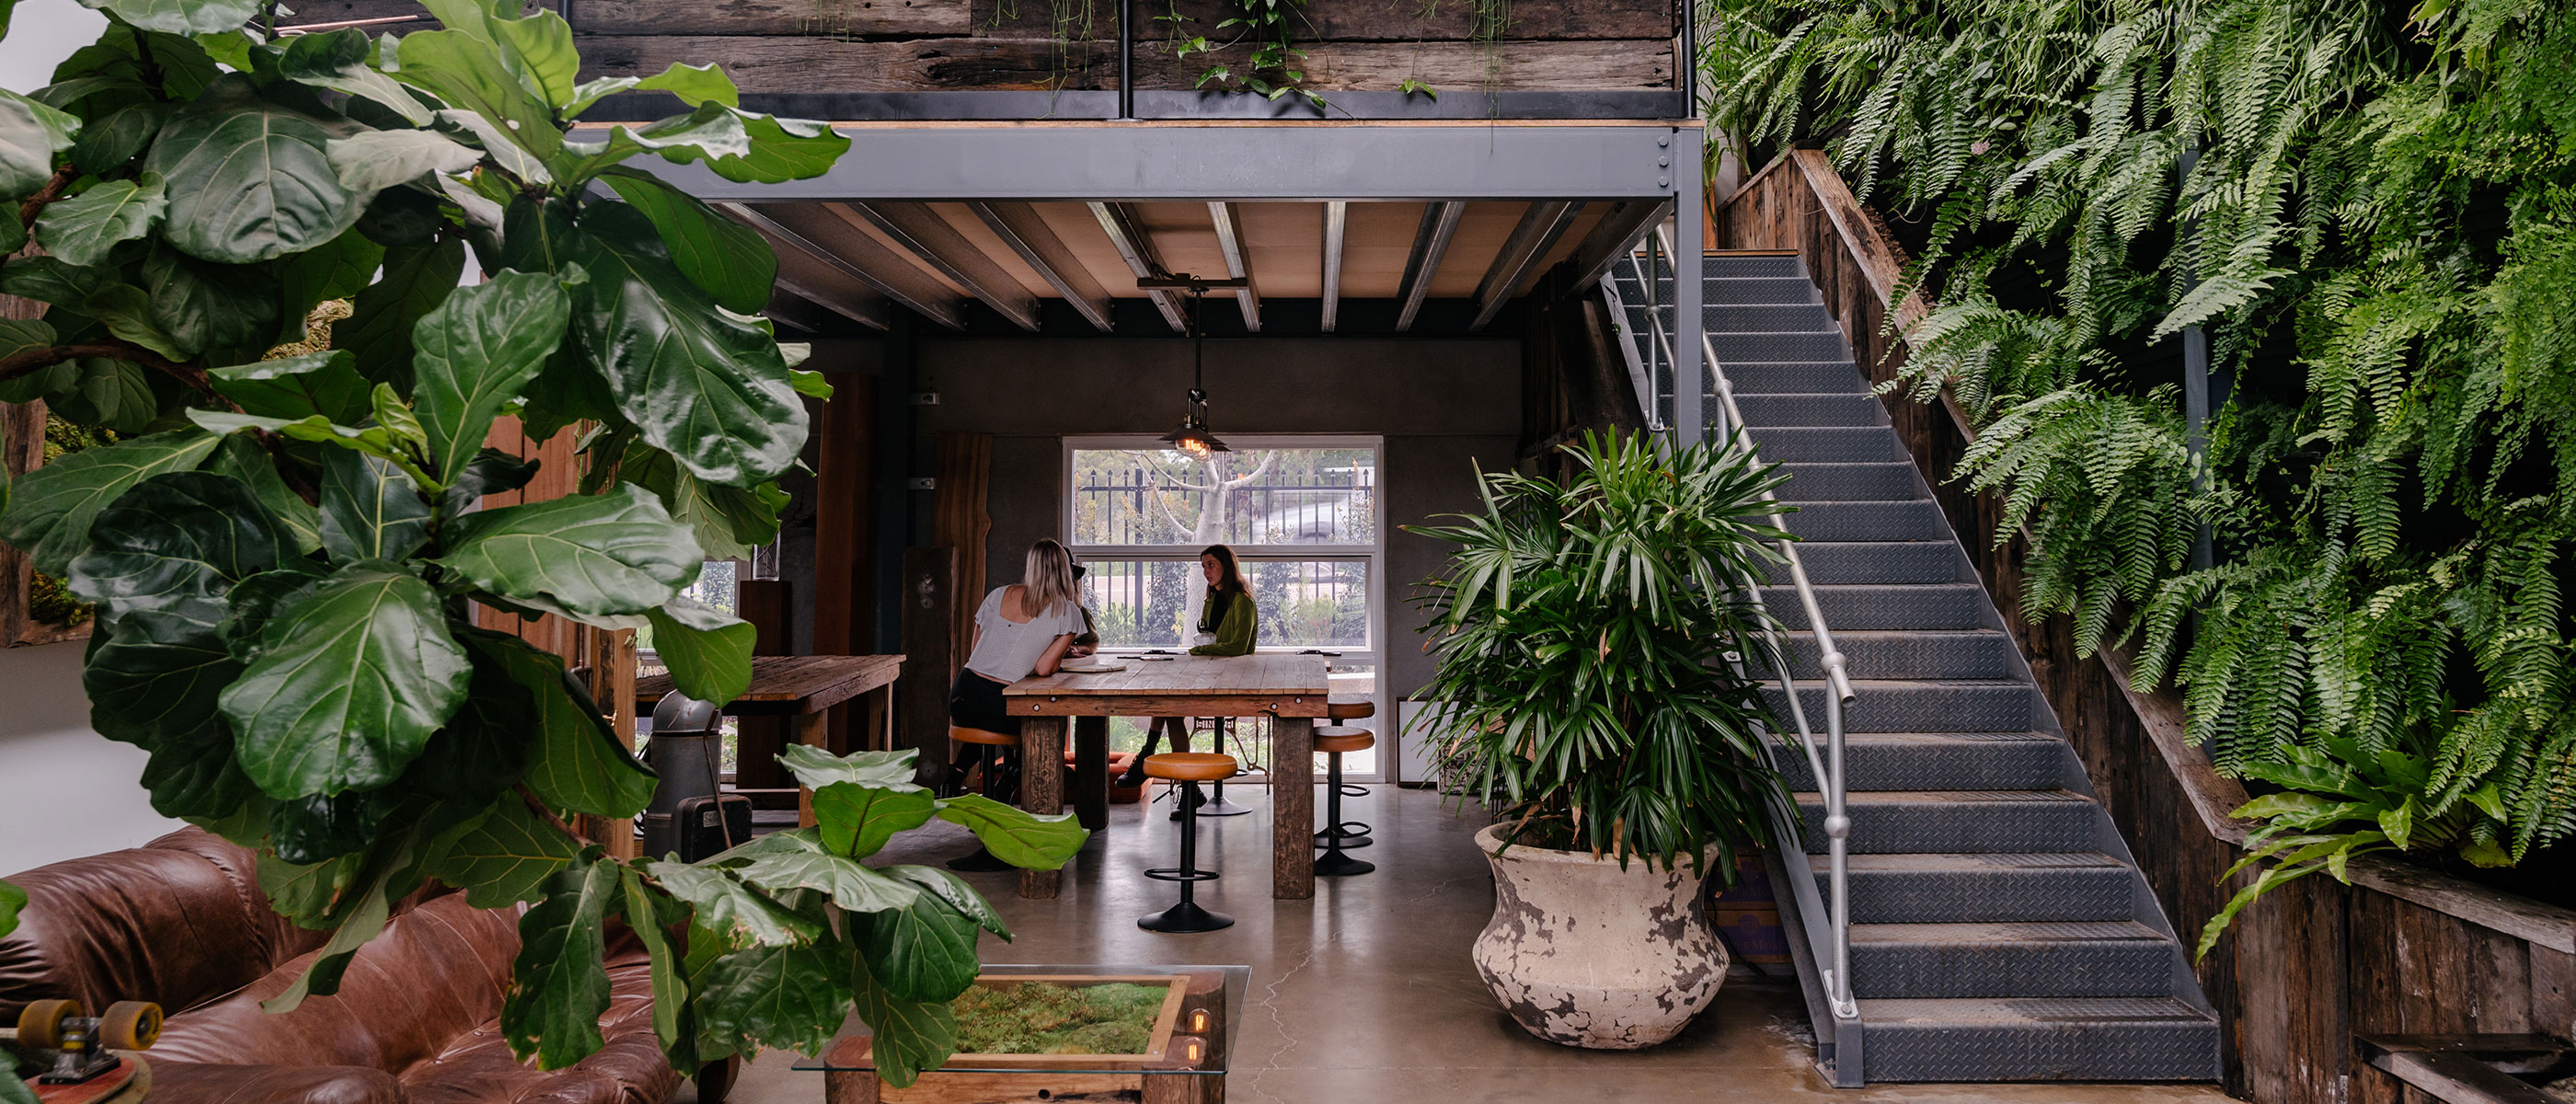 MBS warehouse studio space with feature potted plants, vertical garden, custom timber table for meetings and stairs to mezzanine